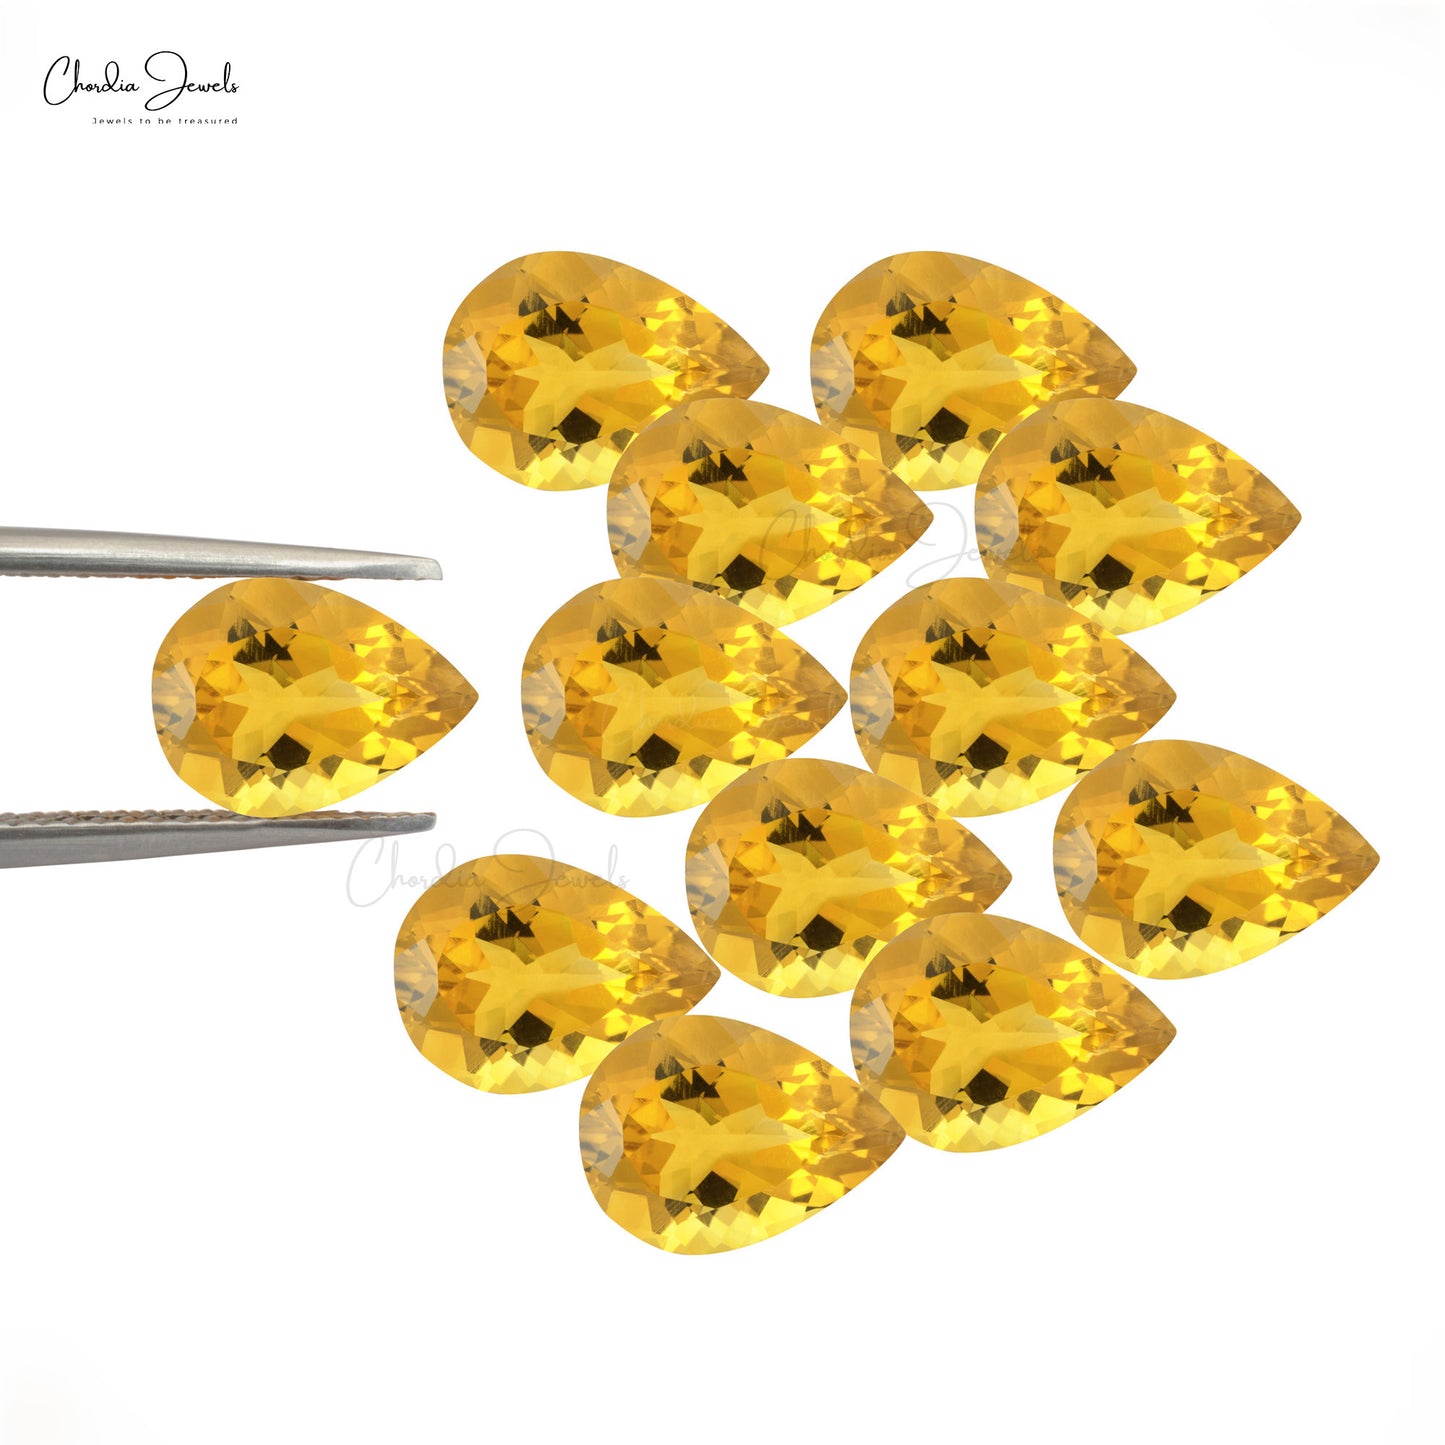 Natural Citrine Gemstone Pear Faceted 7x5 MM for Making Jewelry, 1 Piece